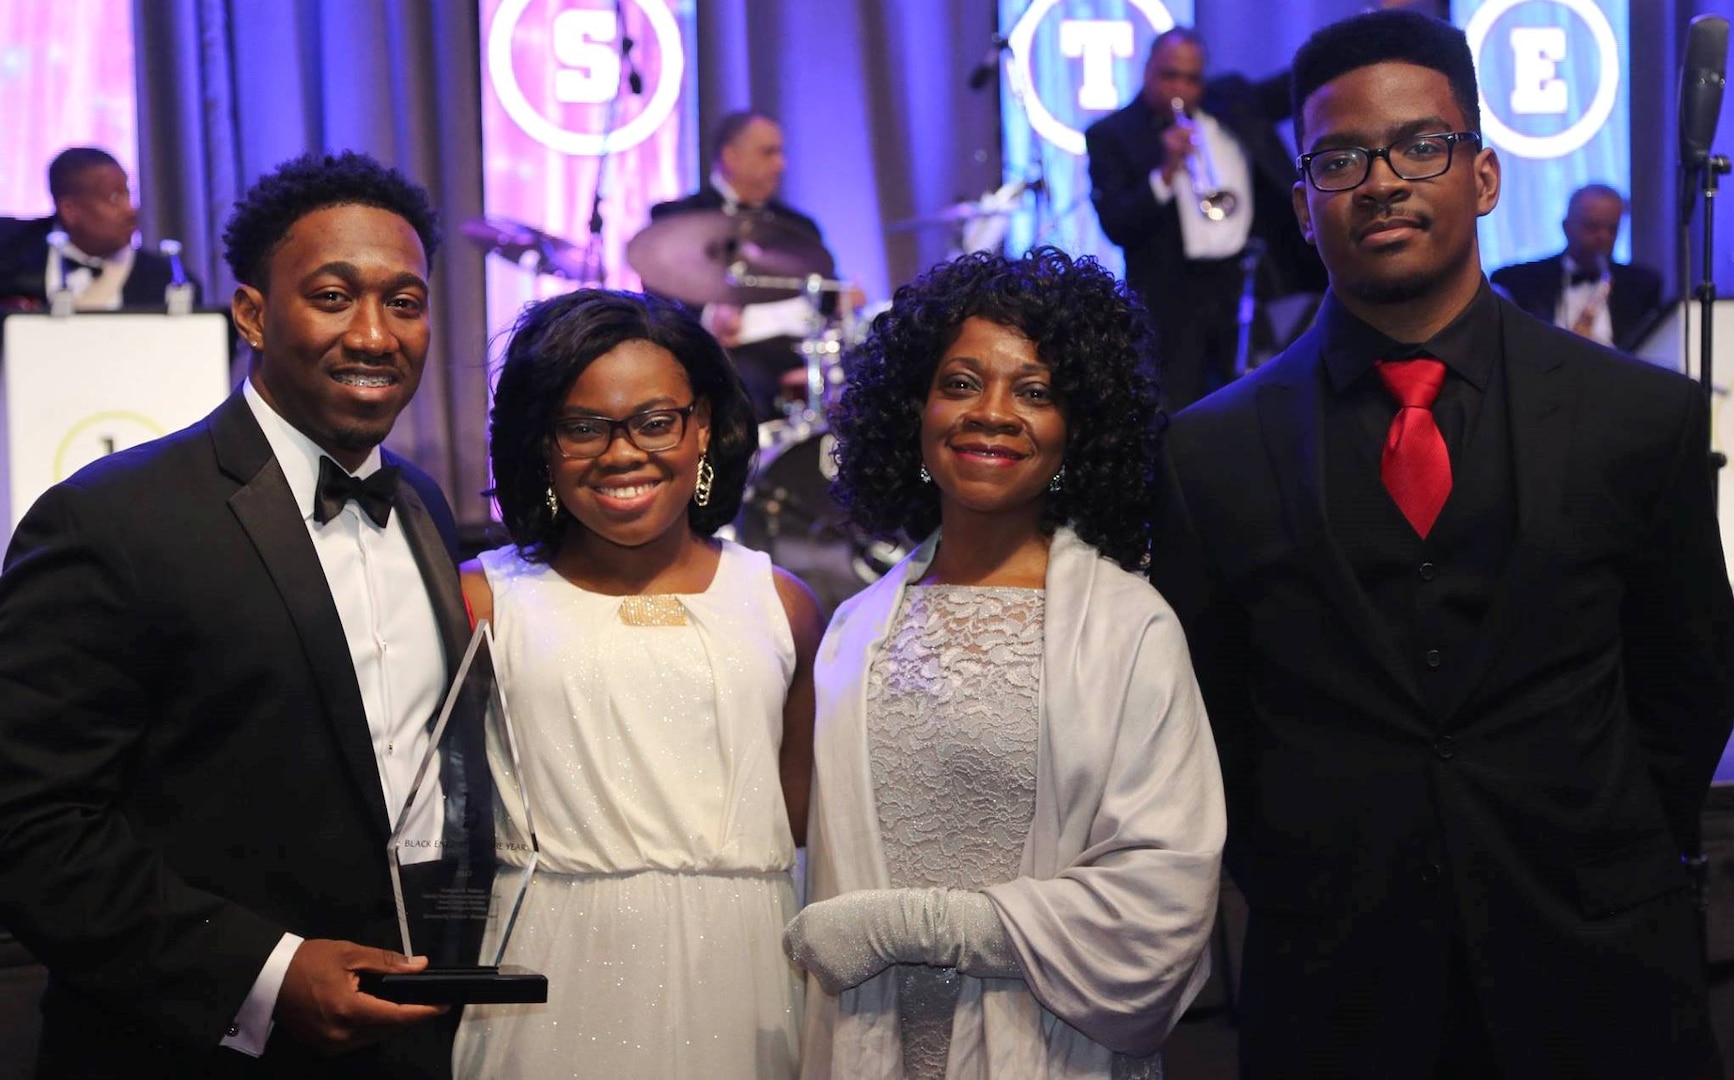 WASHINGTON (Feb. 11, 2017) - Dwayne Nelson, Naval Surface Warfare Center Dahlgren Division engineer, holds his Black Engineer of the Year (BEYA) Award after being honored for his community service accomplishments at the 31st annual BEYA gala. Standing left to right are Dwayne; his sister, Olivia; mother, Linda; and brother, Rudy. "To my family, friends, Alpha Phi Alpha fraternity brothers, and co-workers, a simple thank you is definitely not enough to tell you how much I wholeheartedly appreciate everything you’ve done for me," said Nelson. "I never would have made it here without you. Your support has been amazing!" (U.S. Navy photo by Rear. Adm. Tom Druggan/Released)